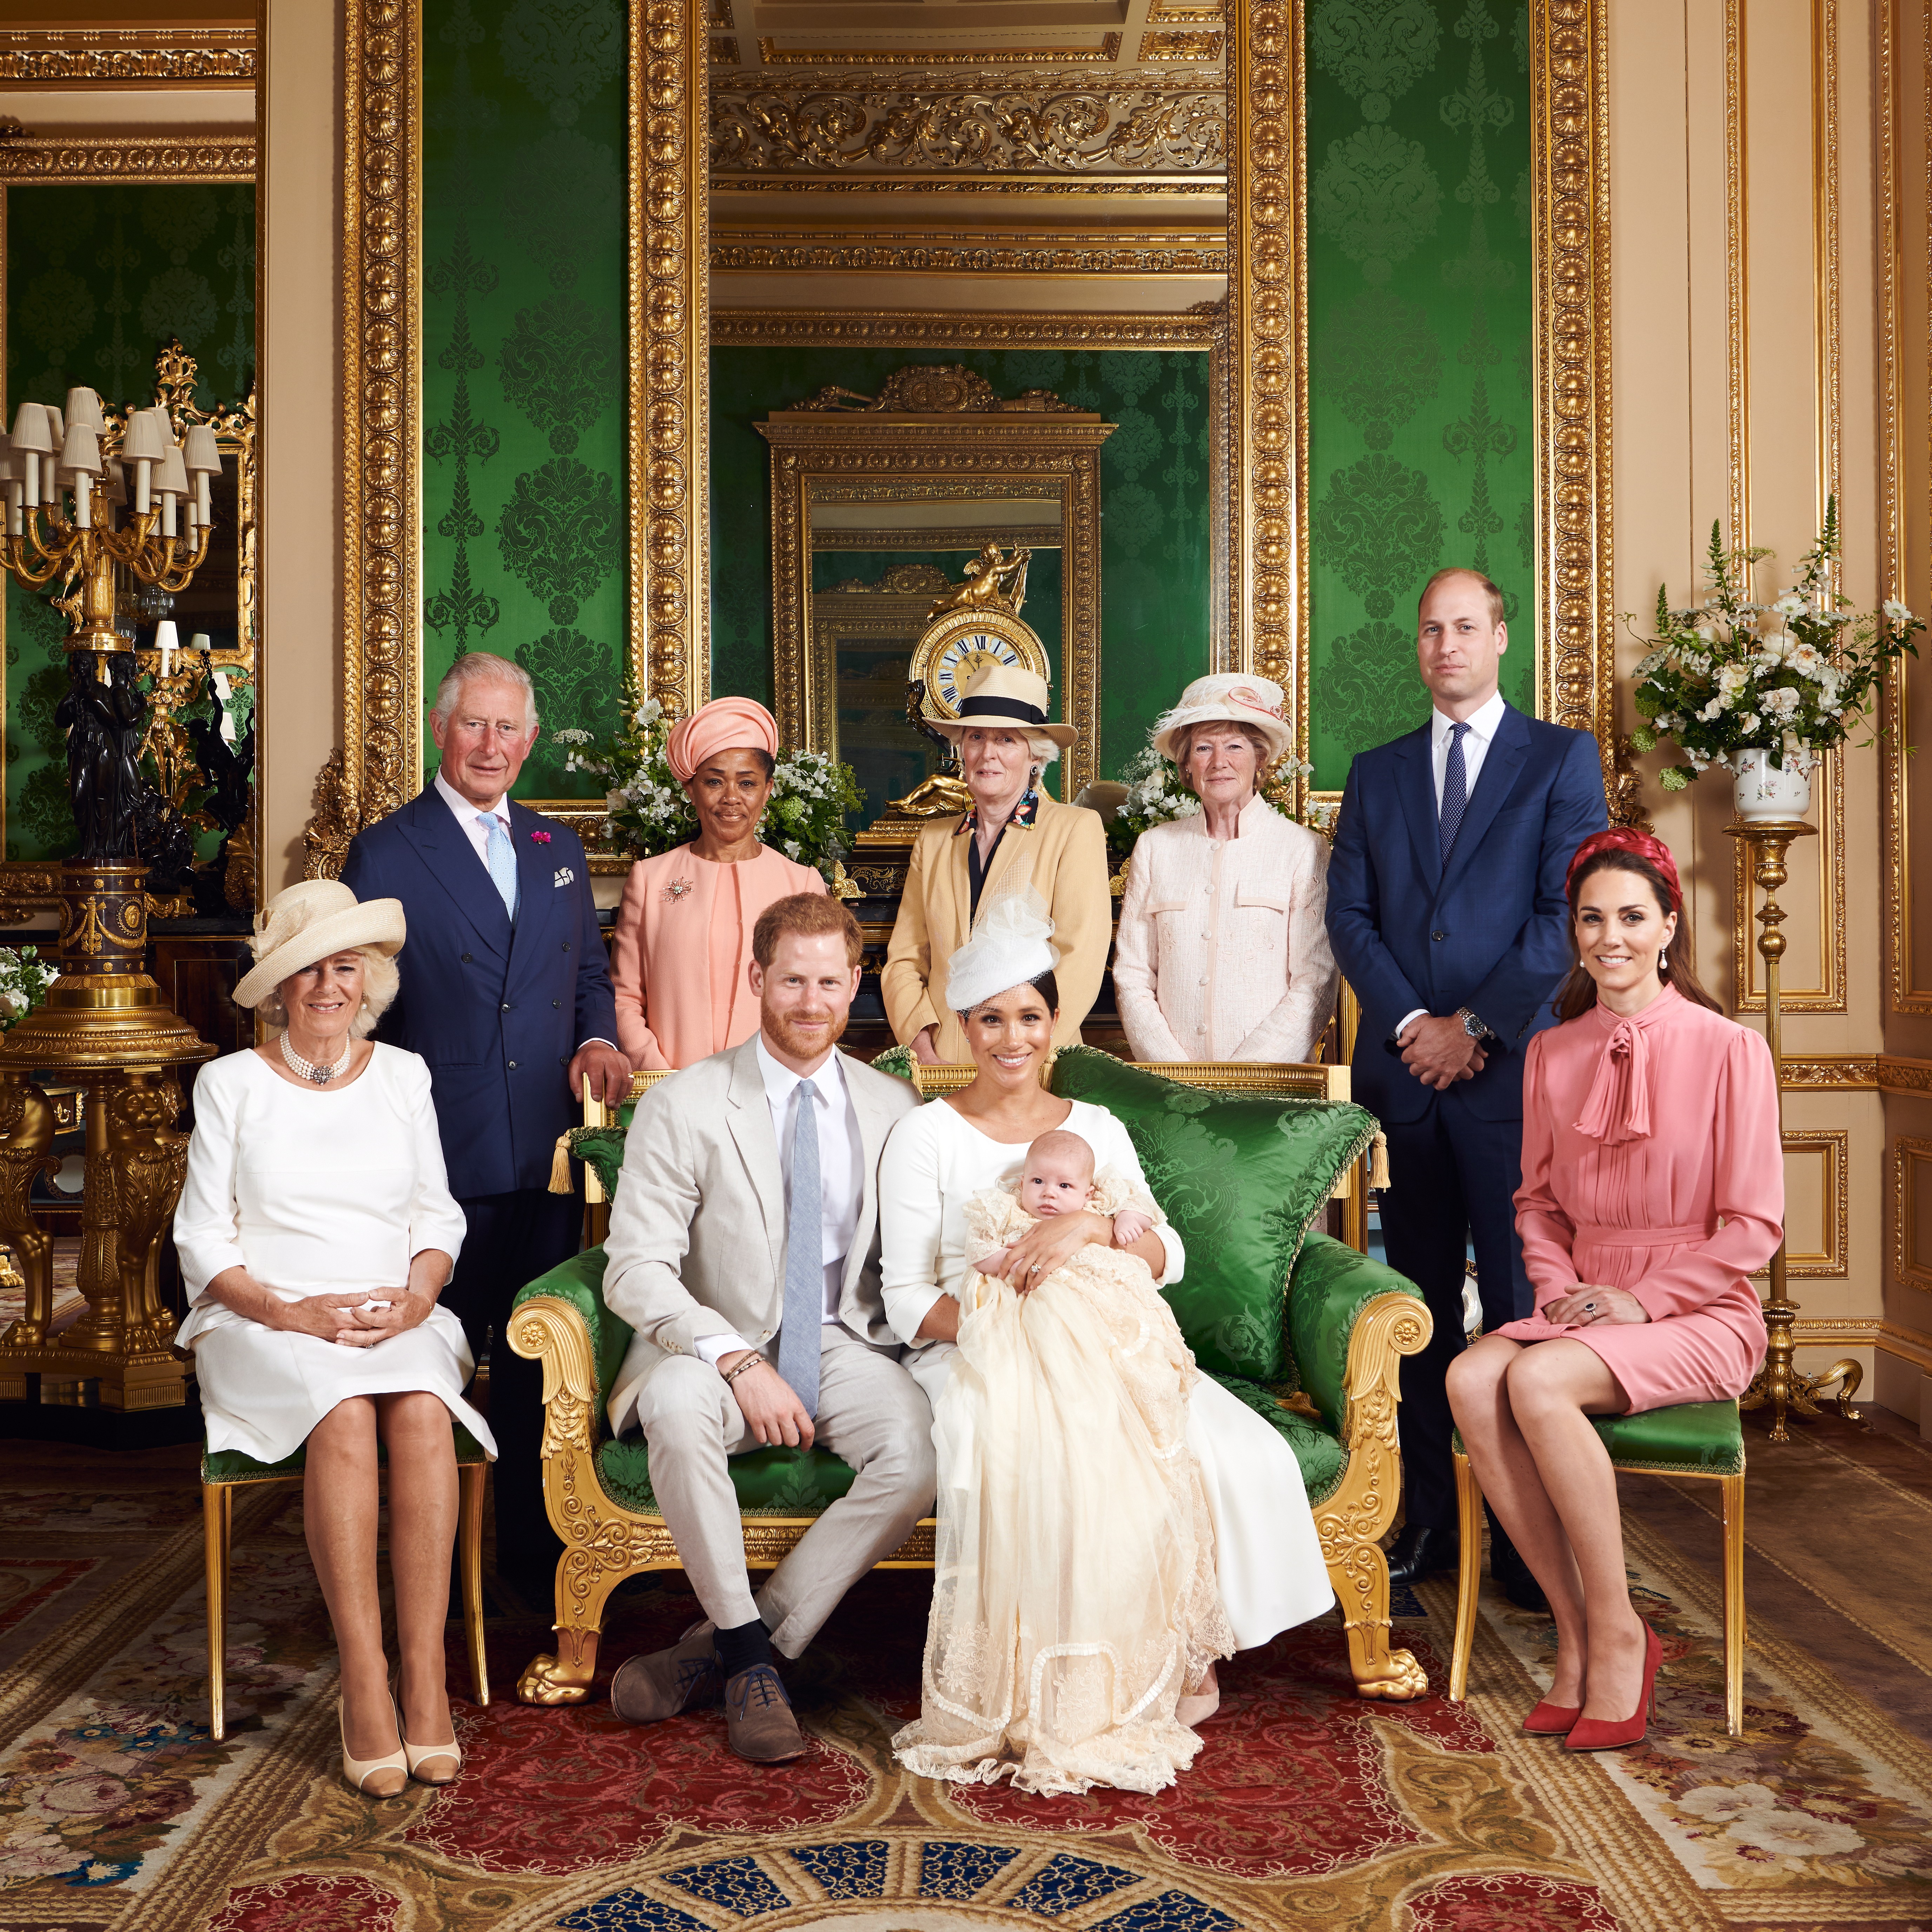 Prince Harry and Meghan, Duke and Duchess of Sussex (front centre), with their son, Archie, and other members of the British royal family and guests at Saturday’s christening at Windsor Castle. (From left) Camilla, Duchess of Cornwall, Prince Charles, Prince of Wales, Doria Ragland, Lady Jane Fellowes, Lady Sarah McCorquodale, Prince William, Duke of Cambridge and Catherine, Duchess of Cambridge. Photo: EPA-EFE